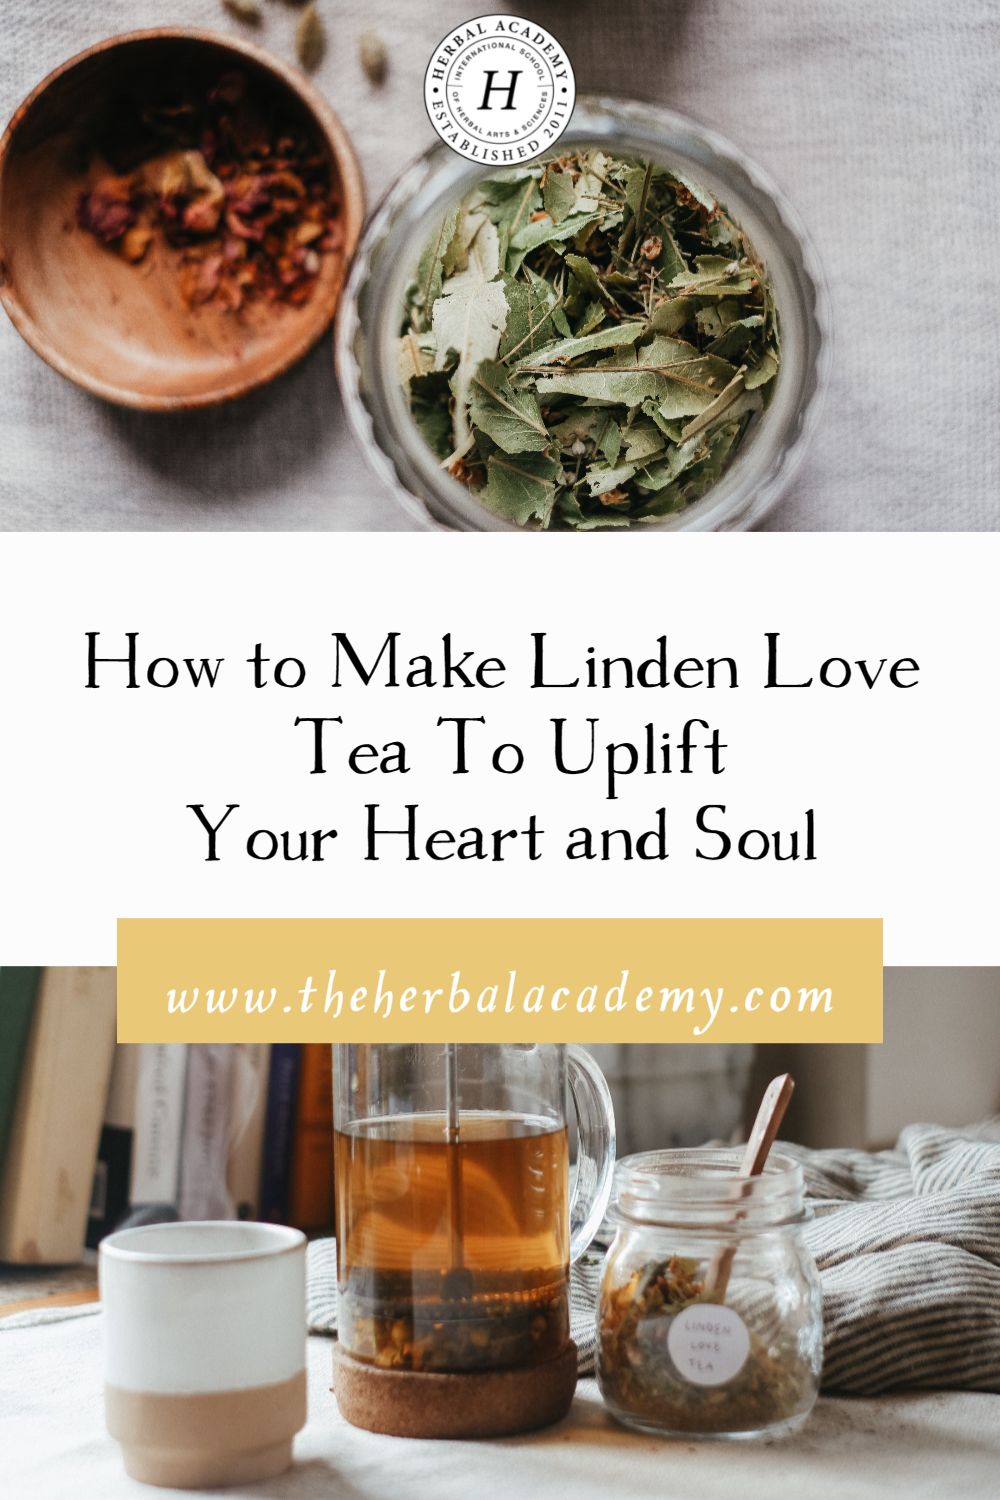 How to Make Linden Love Tea to Uplift Your Heart and Soul | Herbal Academy | This gentle Linden Love Tea recipe soothes the energetic heart and is the perfect thing to uplift yourself and soothe heartache and grief.